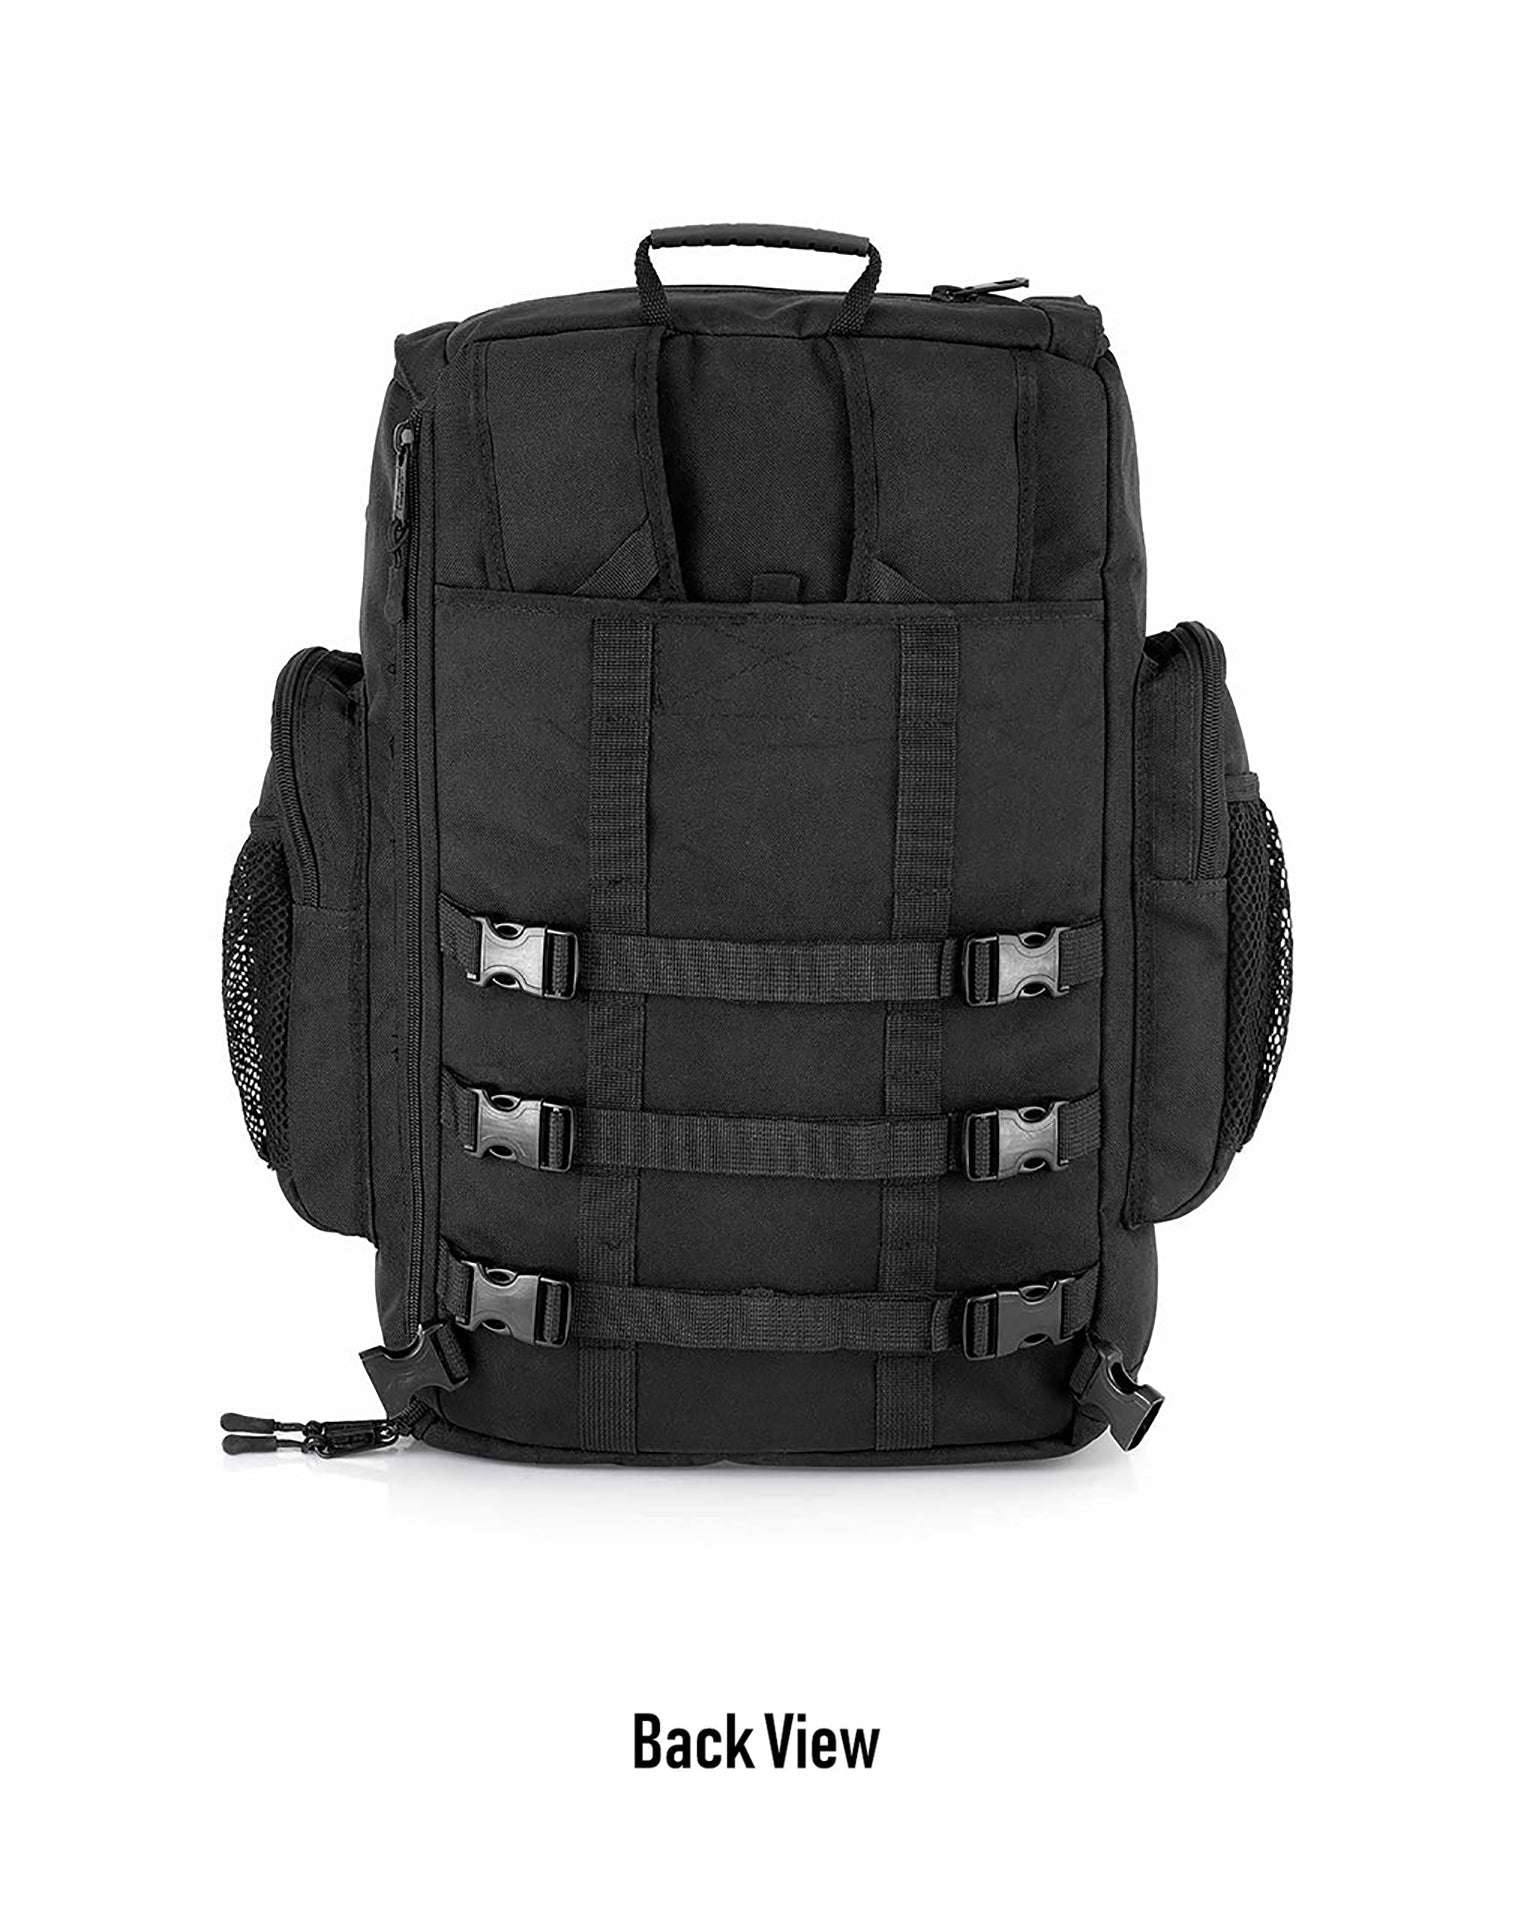 35L - Trident XL Motorcycle Backpack